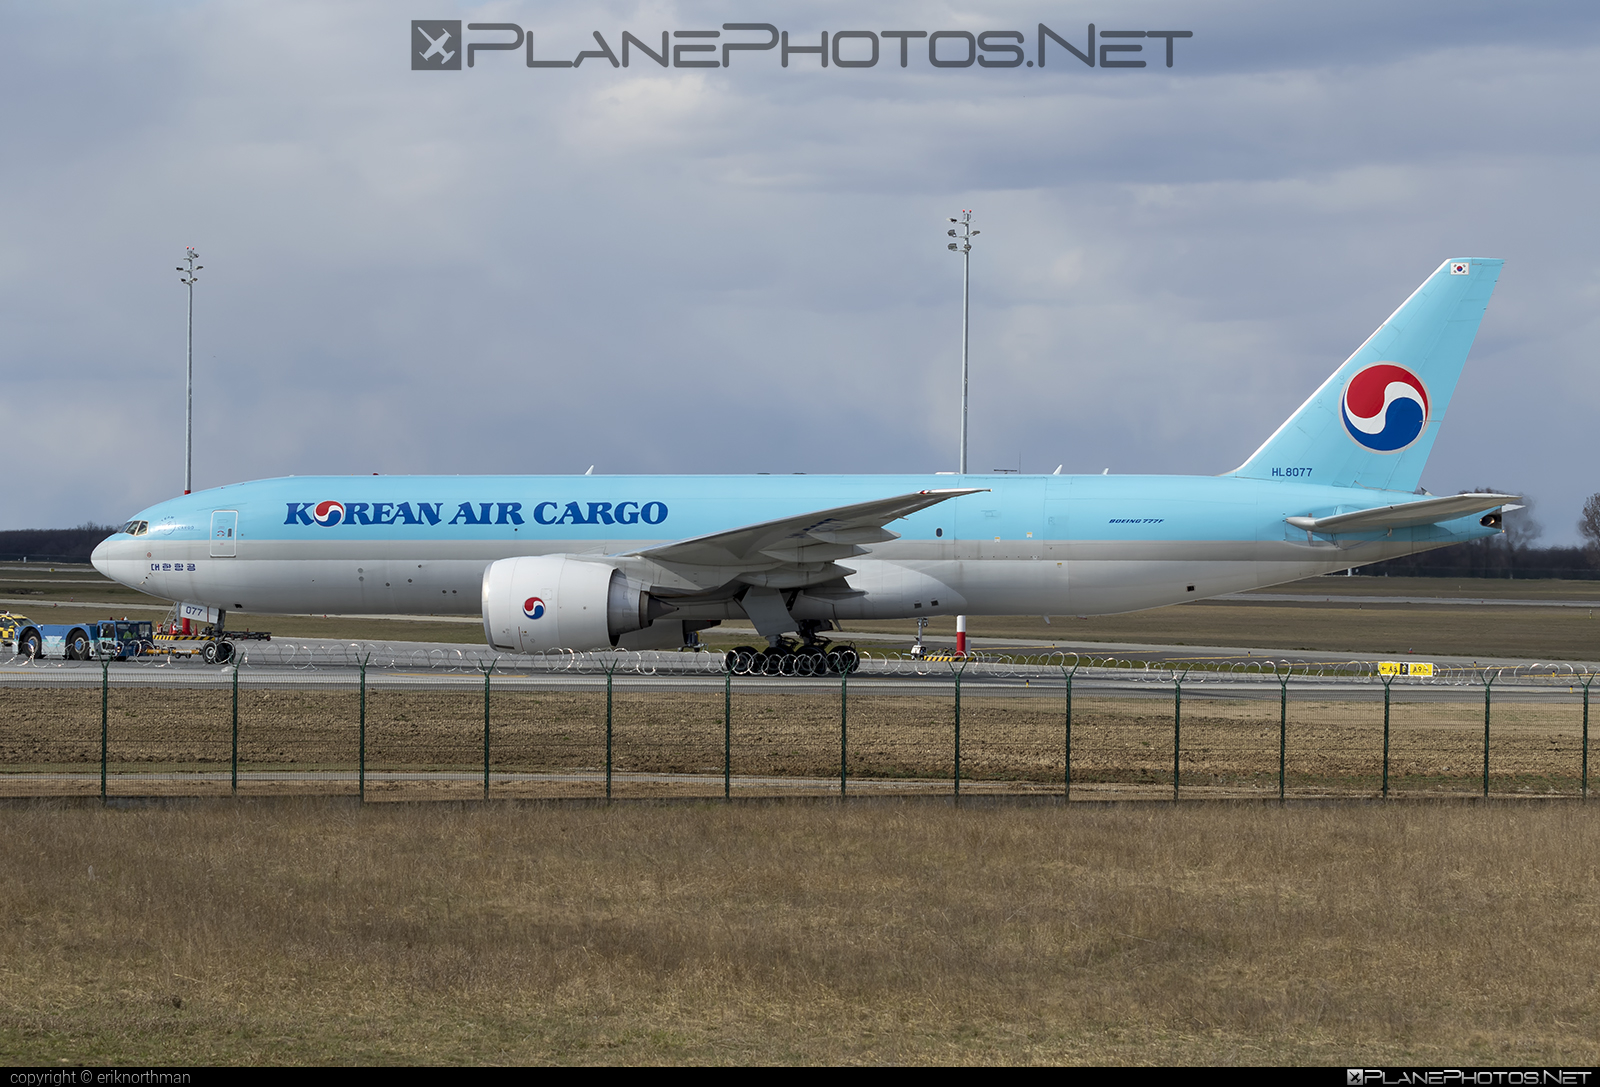 Boeing 777F - HL8077 operated by Korean Air Cargo #b777 #b777f #b777freighter #boeing #boeing777 #koreanair #koreanaircargo #tripleseven